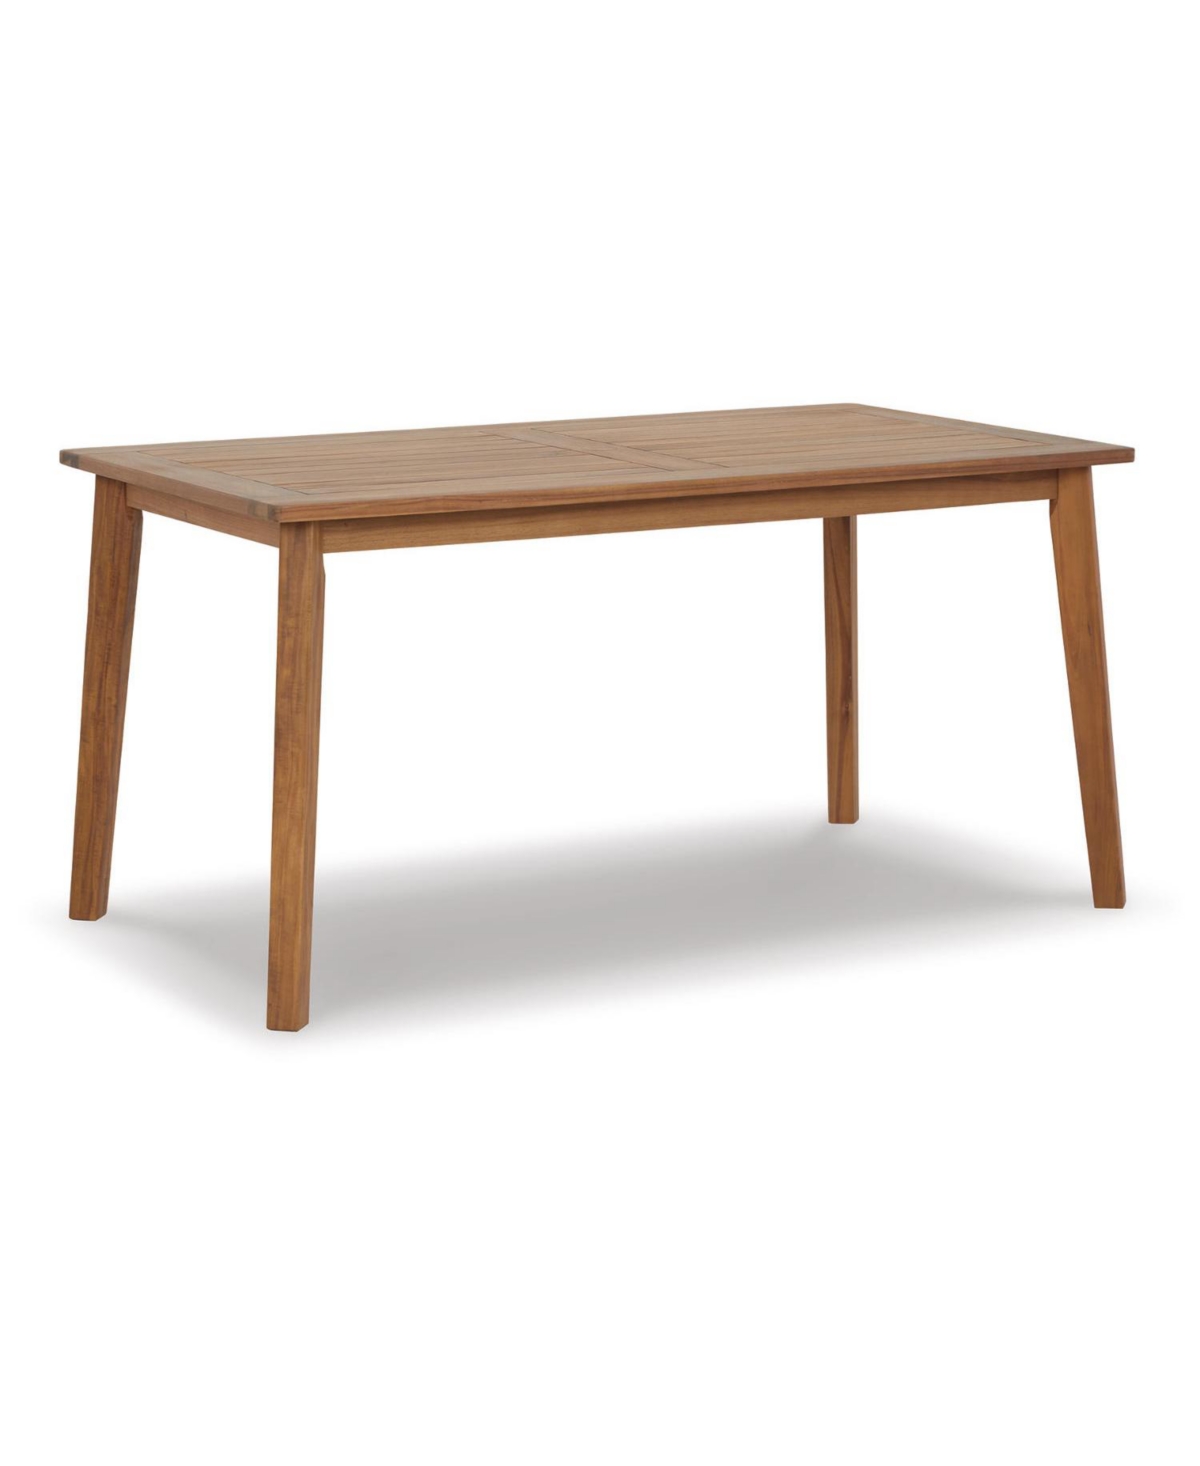 Signature Design By Ashley Janiyah Rectangular Dining Table In Light Brown